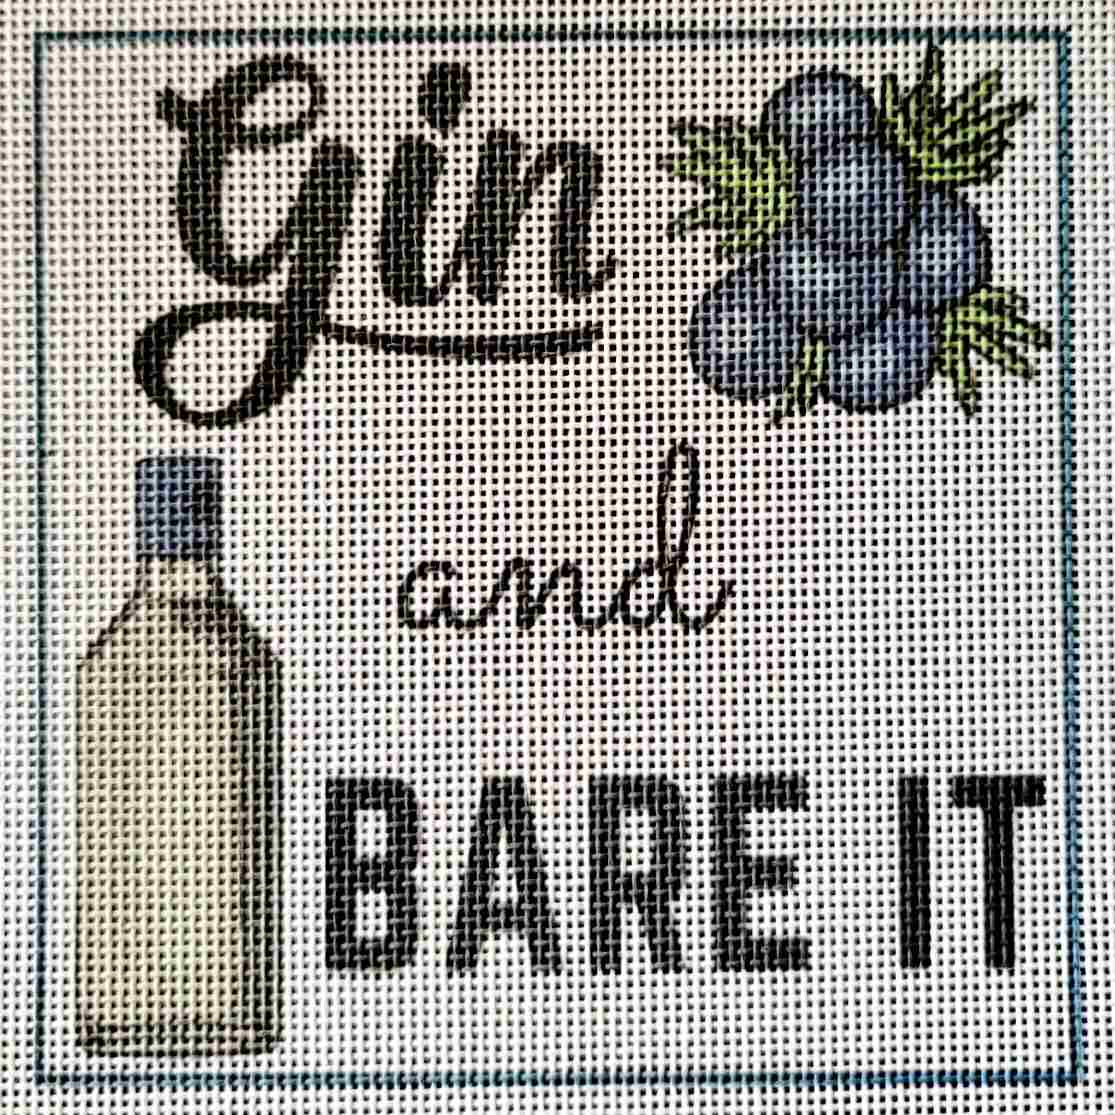 Gin and Bare It needlepoint canvas.